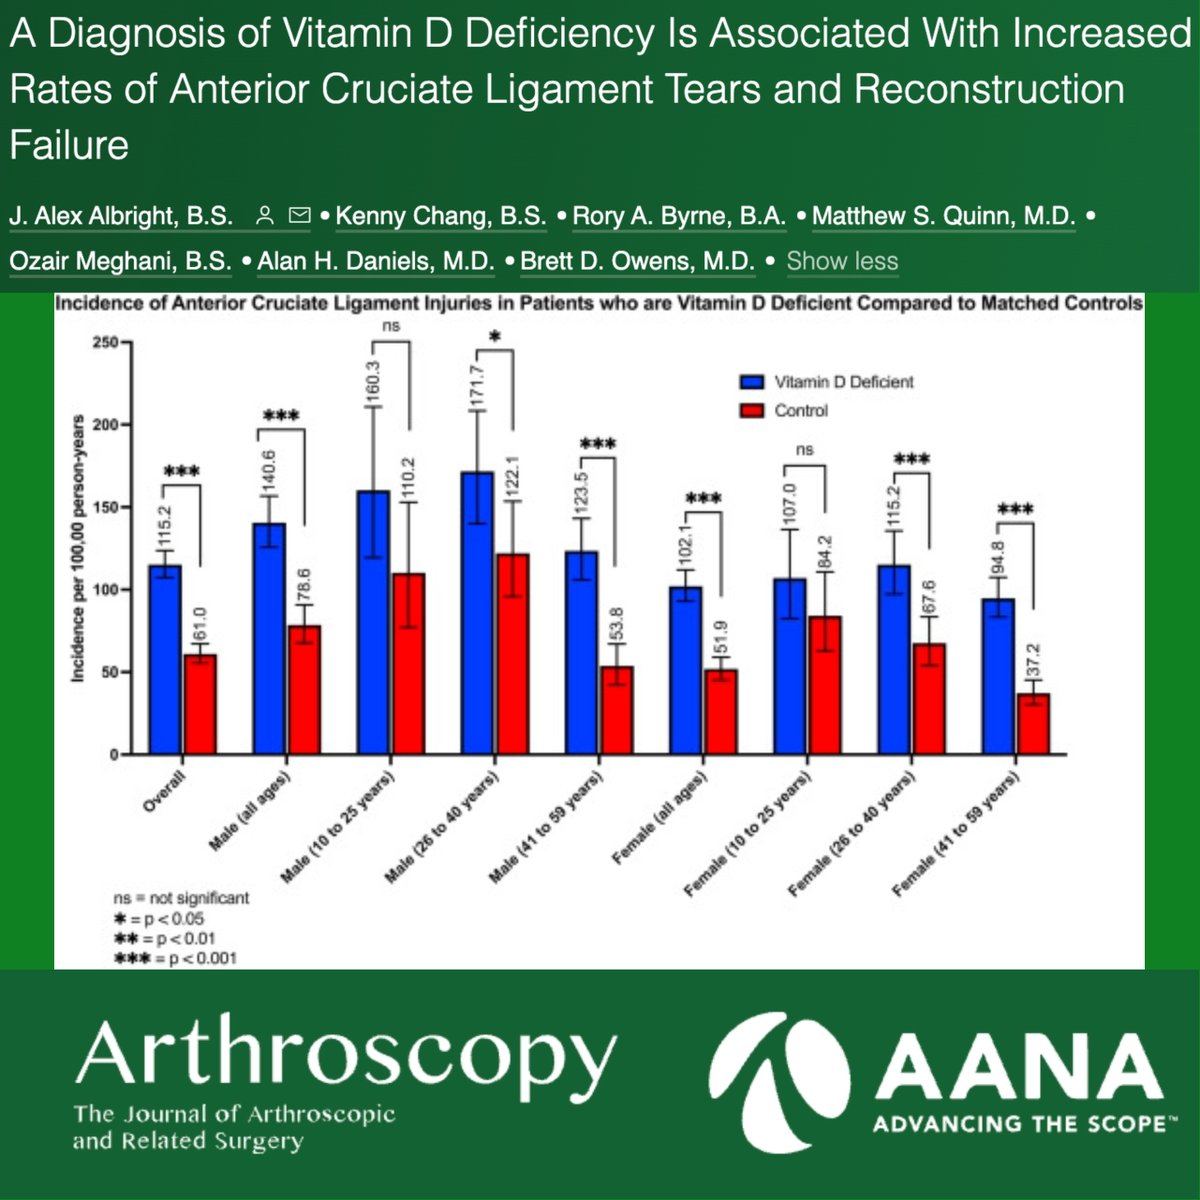 This study reports an association between patients previously diagnosed with hypovitaminosis D and significantly increased rates of both index ACL tears and revision ACLR, suggesting an at-risk population. @BrettOwensMD ow.ly/LzrZ50Q2FqW